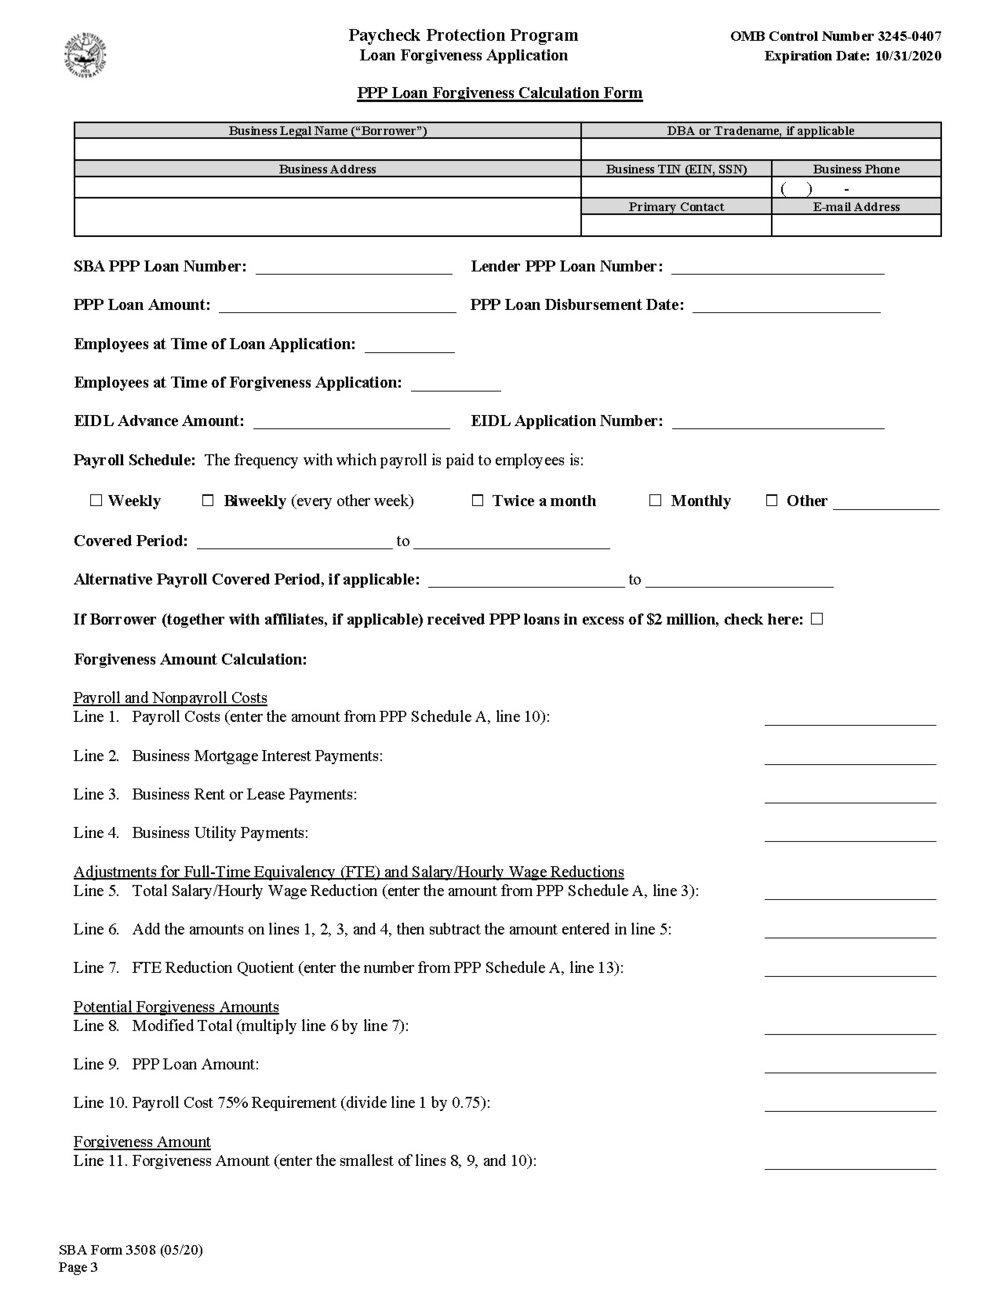 Ppp Loan Forgiveness Application And Instructions Released By Sba Current Federal Tax Developments